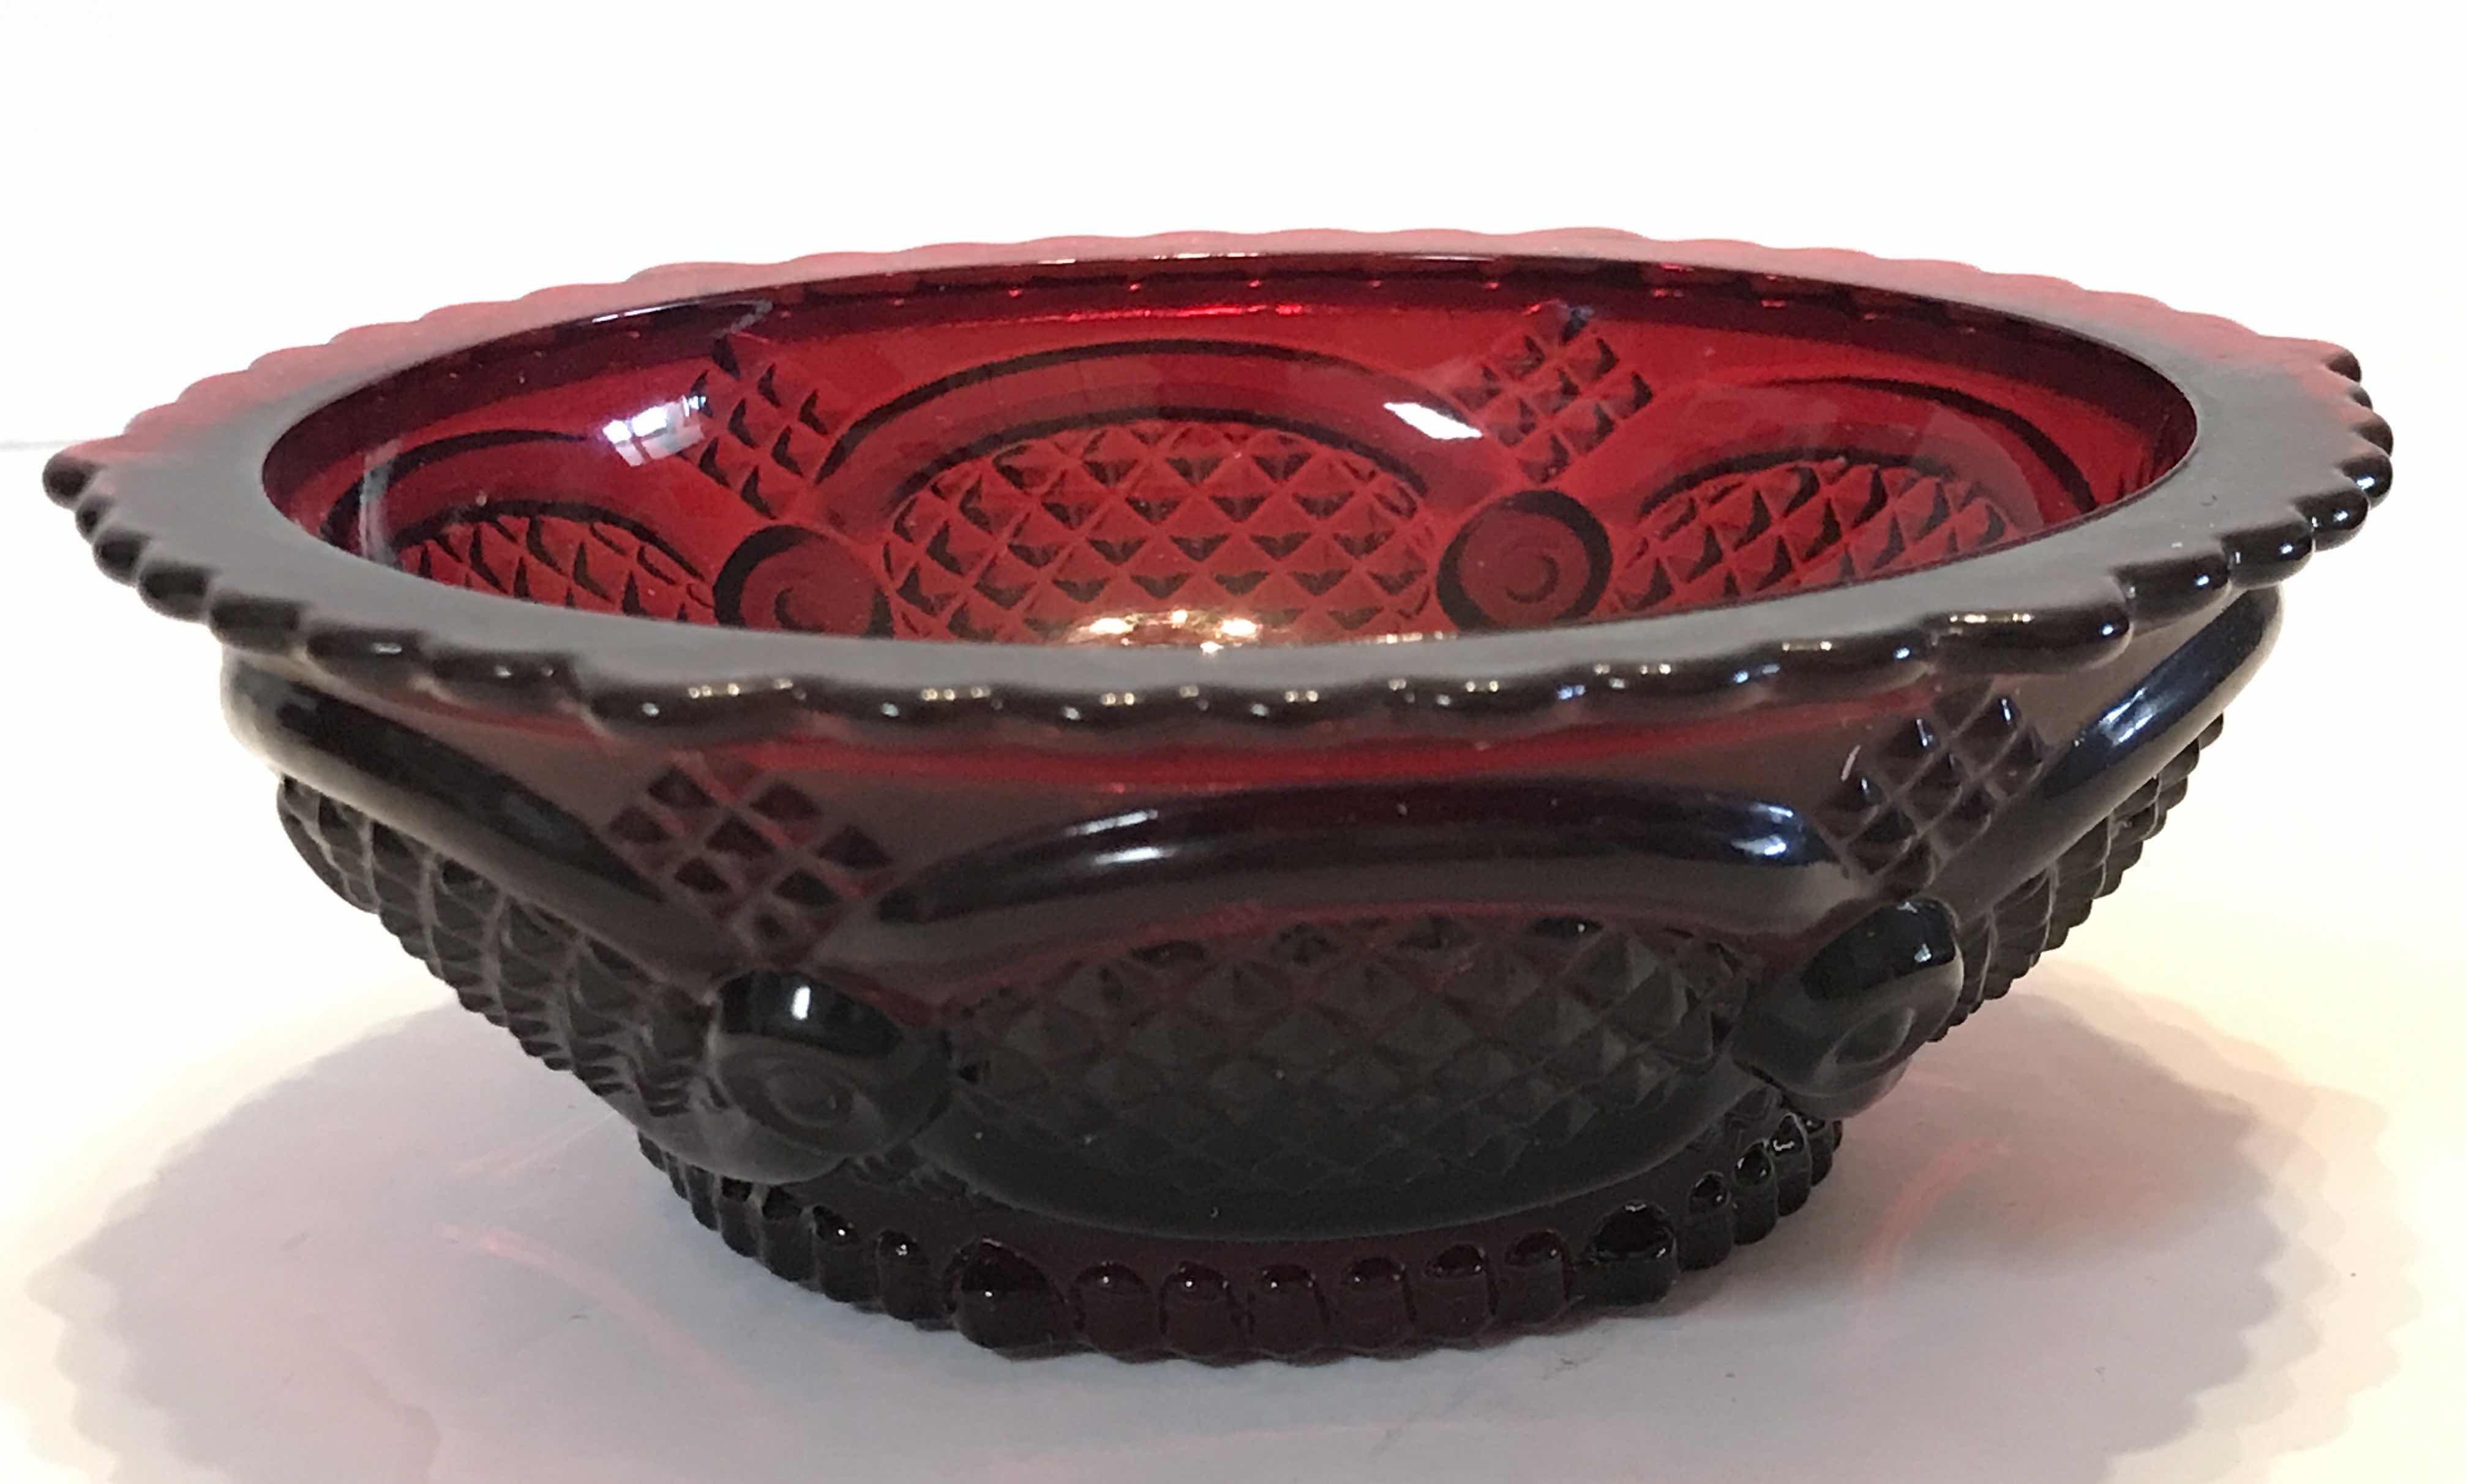 Photo 2 of VINTAGE CAPE COD ROYAL RUBY RED AVON GLASS FRUIT/ DESSERT BOWLS SET OF 8 - MORE OF THIS COLLECTION IN AUCTION